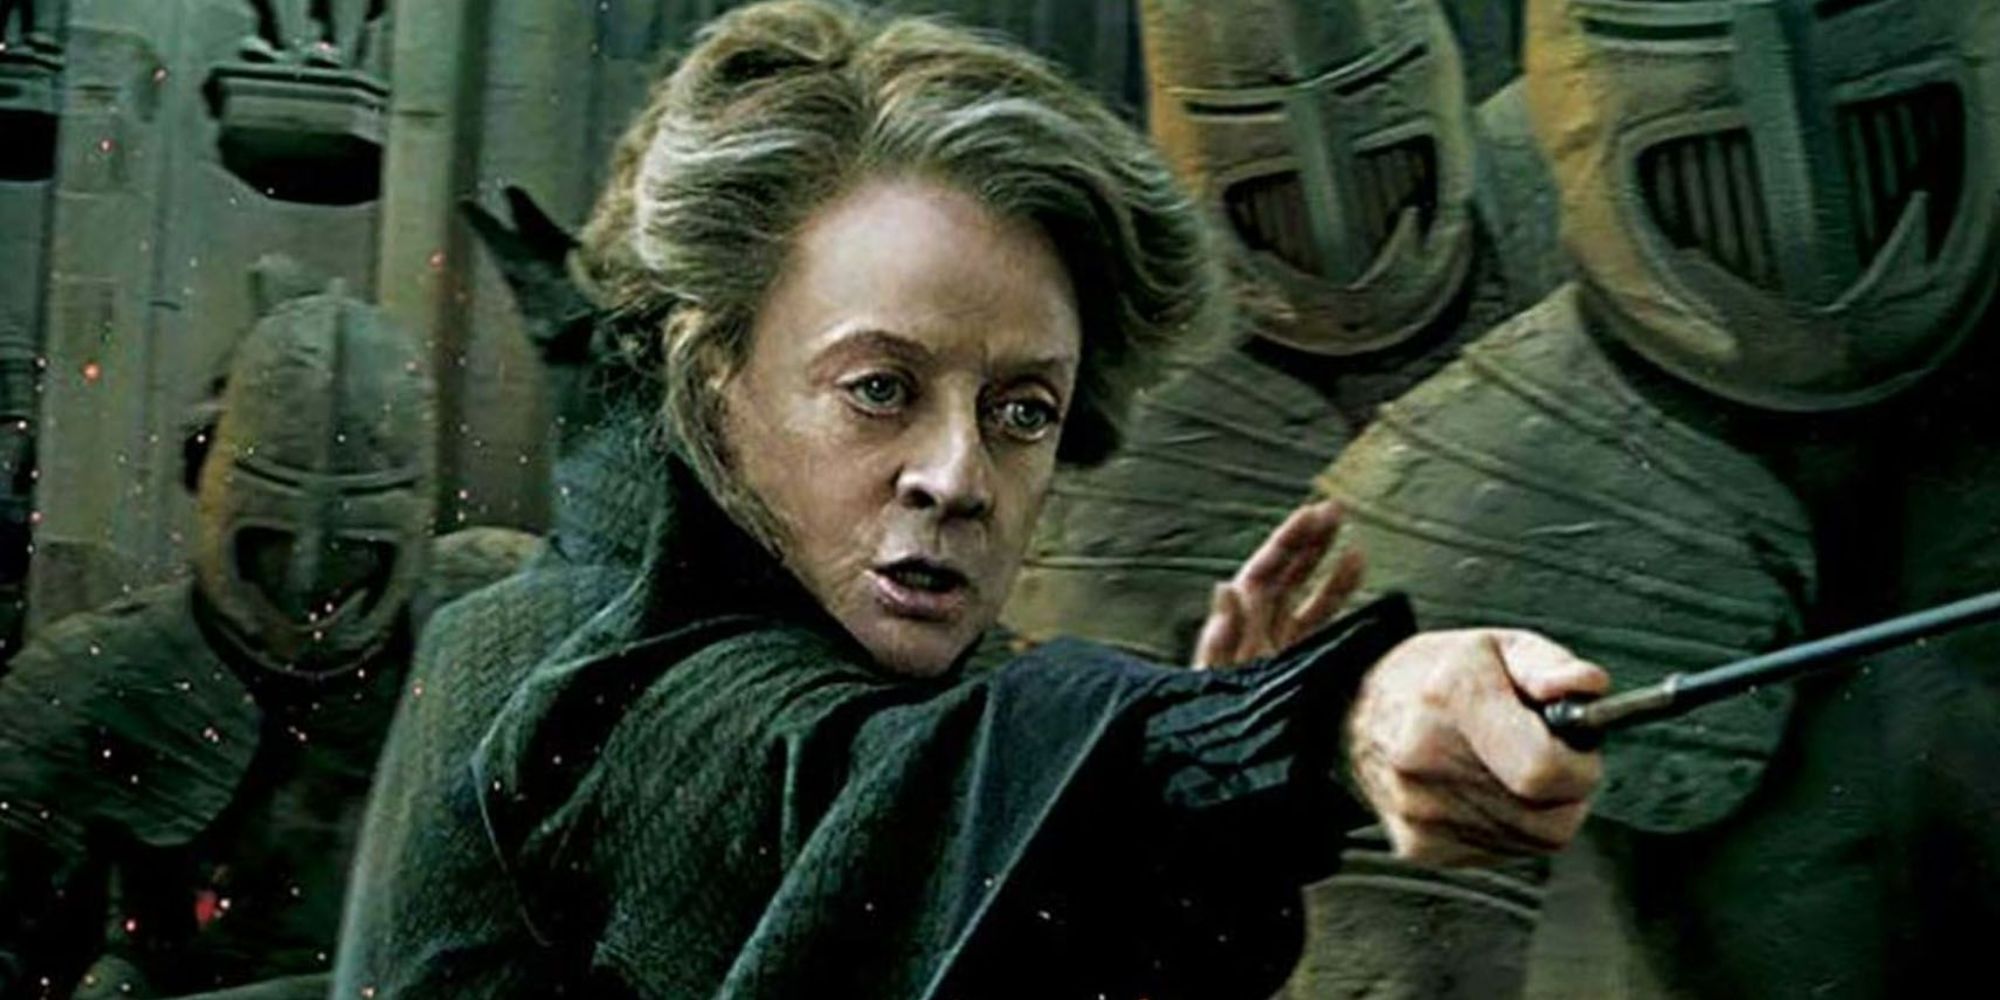 Professor Minerva McGonagall (Dame Maggie Smith) holding her wand during Battle of Hogwarts in Harry Potter and the Deathly Hallows Part 2